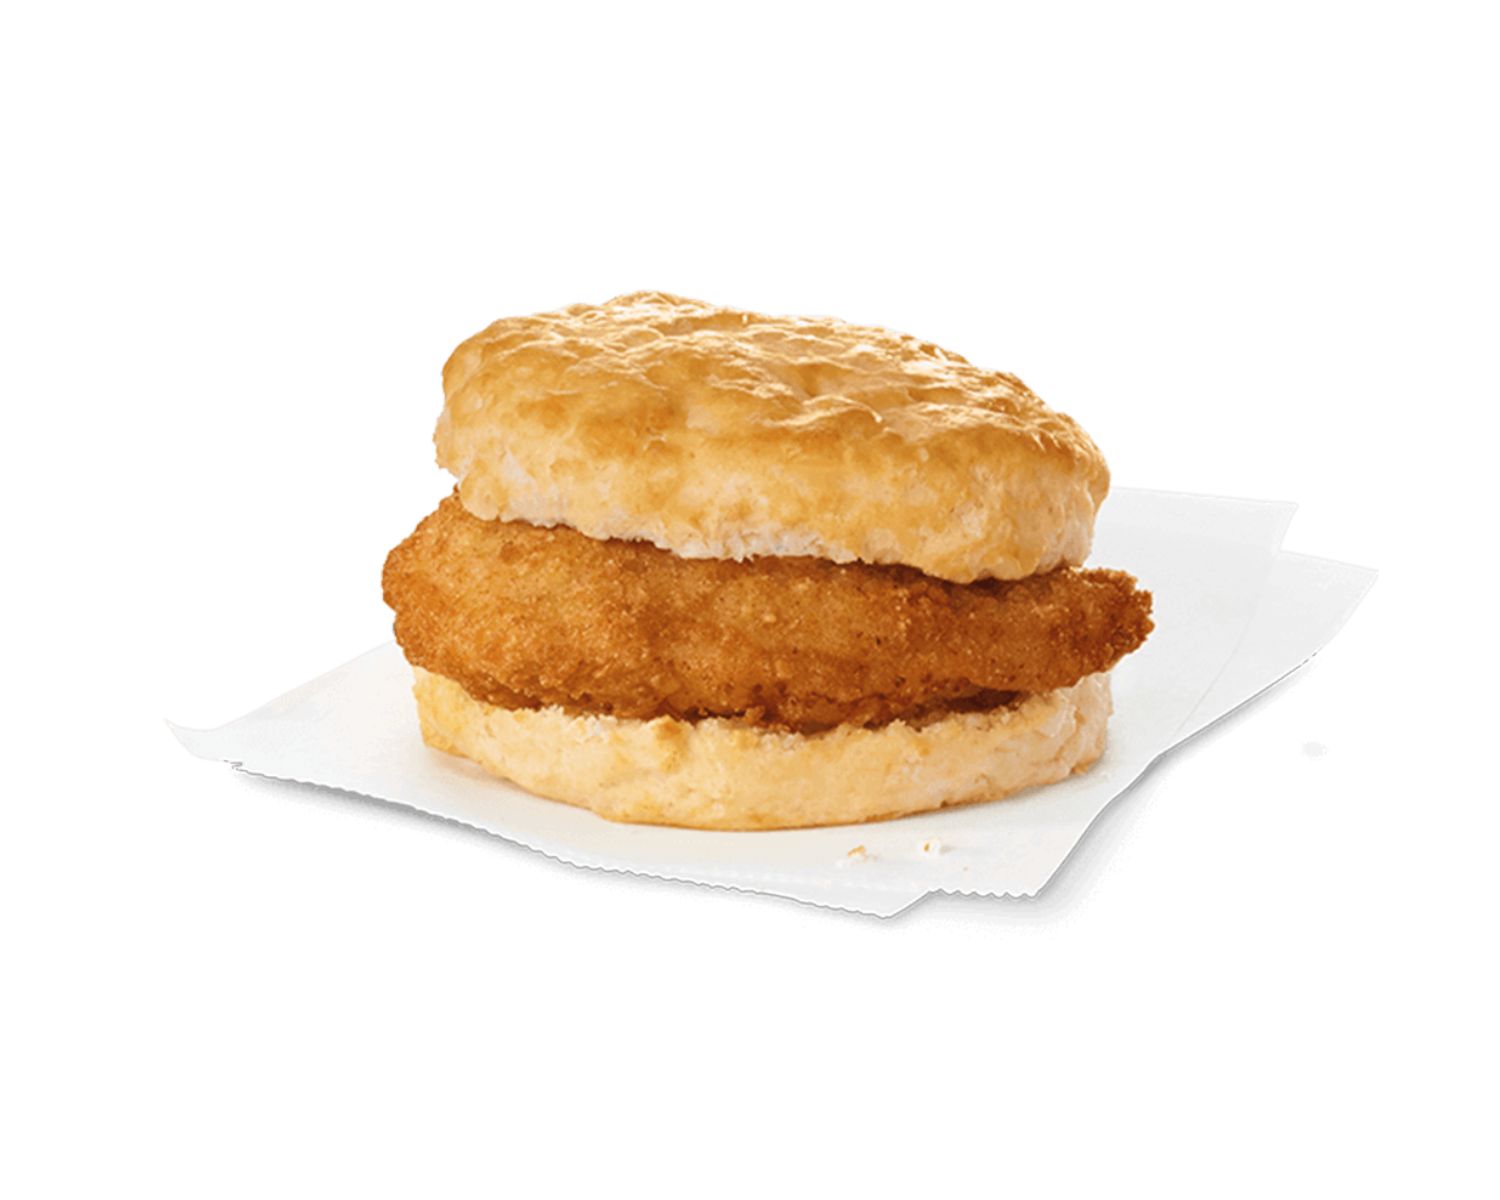 10-chick-fil-a-sausage-biscuit-nutrition-facts